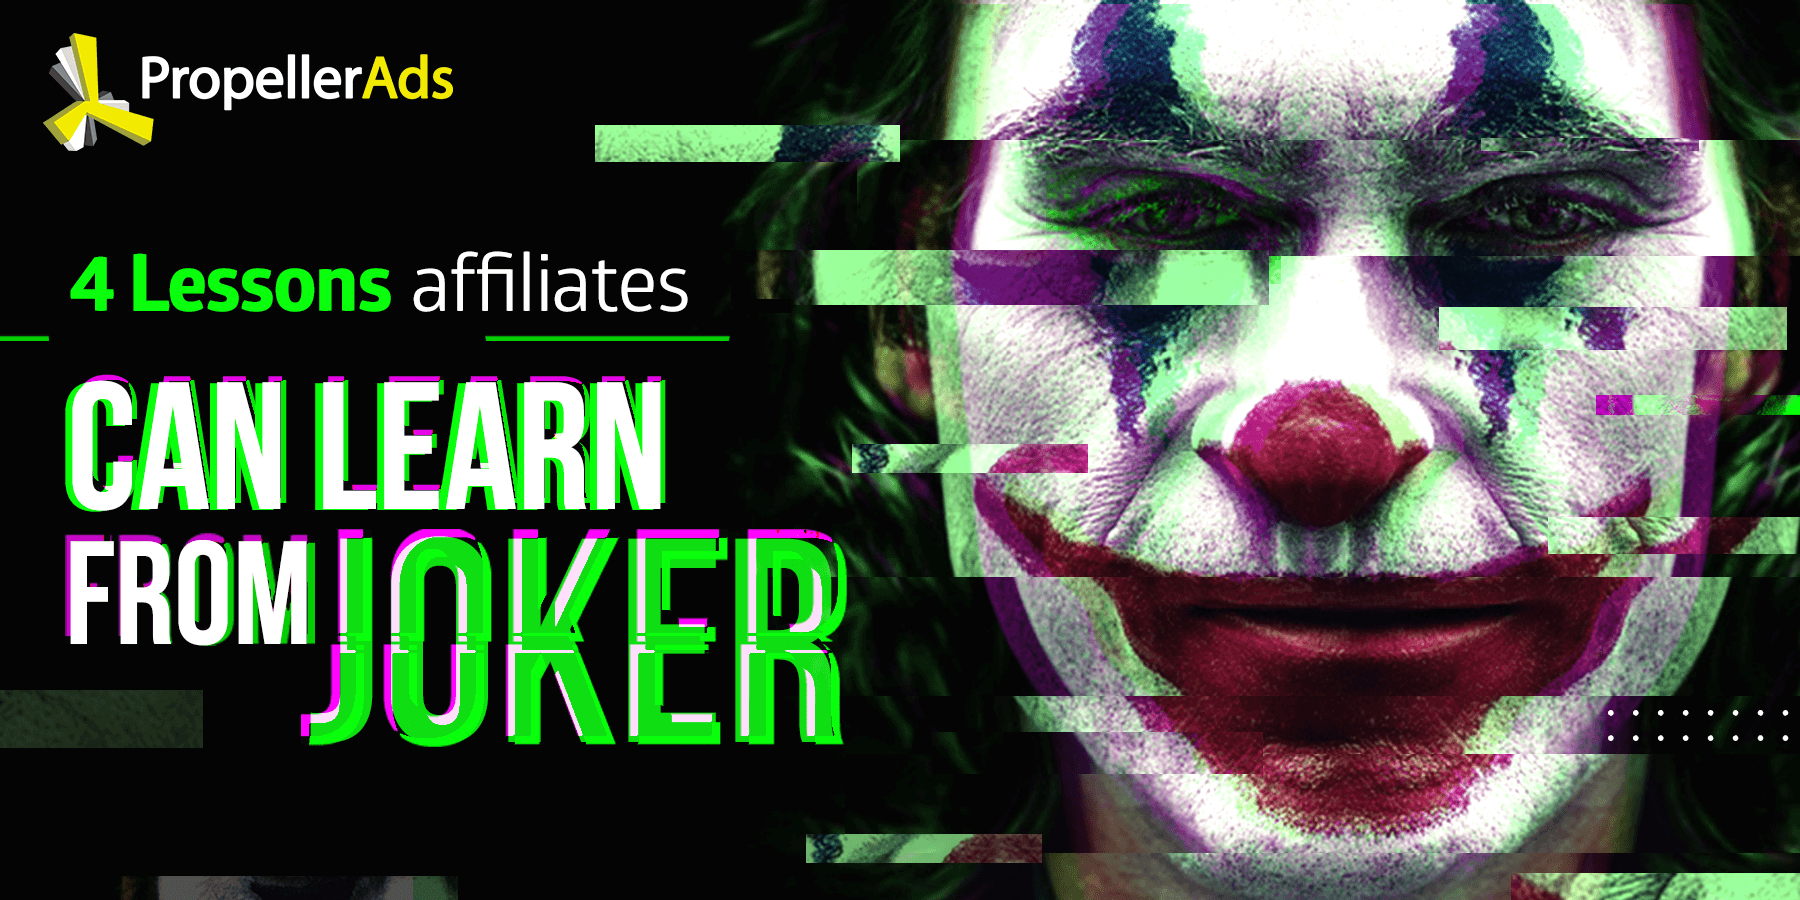 lessons affiliates can learn from Joker